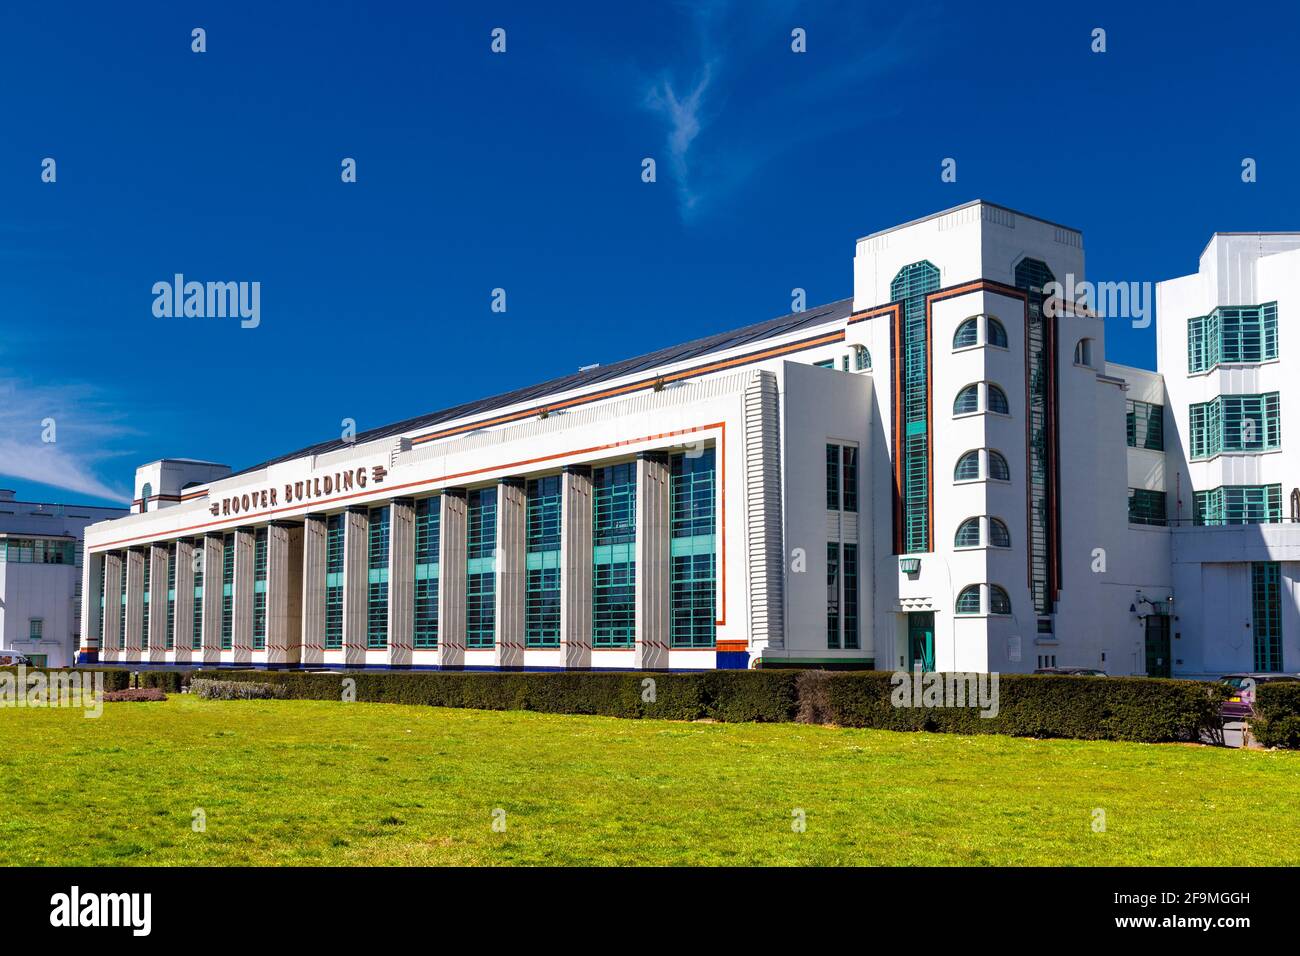 Art deco Hoover Building, former headquarters of The Hoover Company in Perivale, London, UK Stock Photo